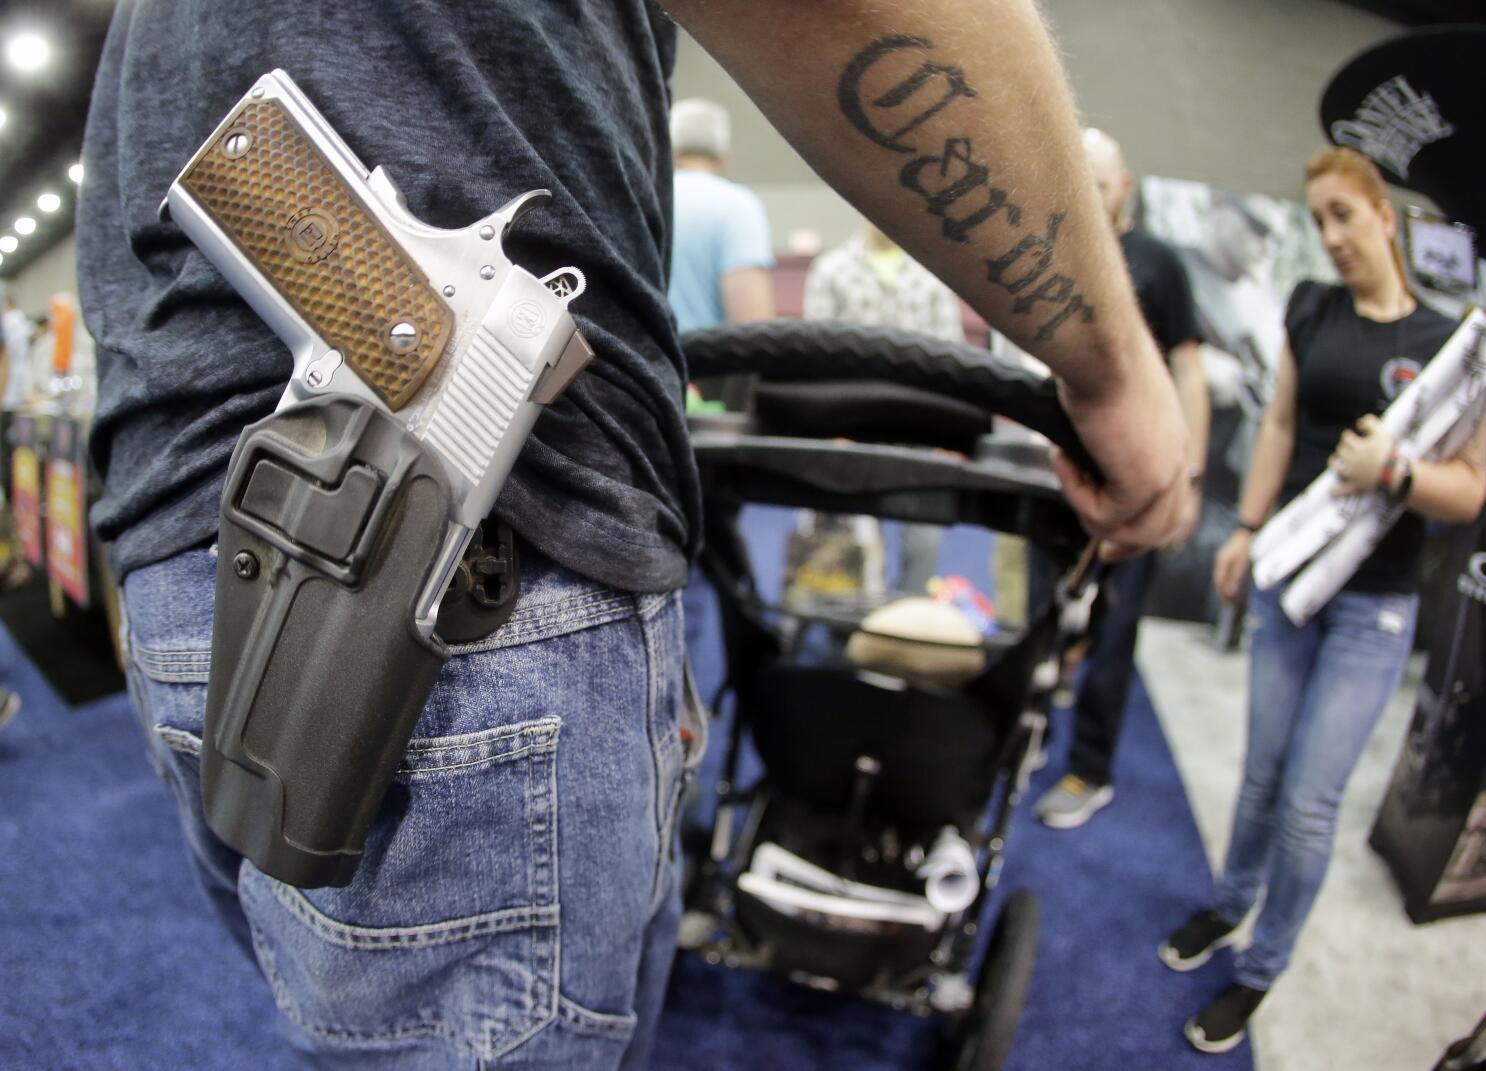 What You Should Know About Concealed Carry Clothing - Gun Control, Rights,  News - LAWS.com